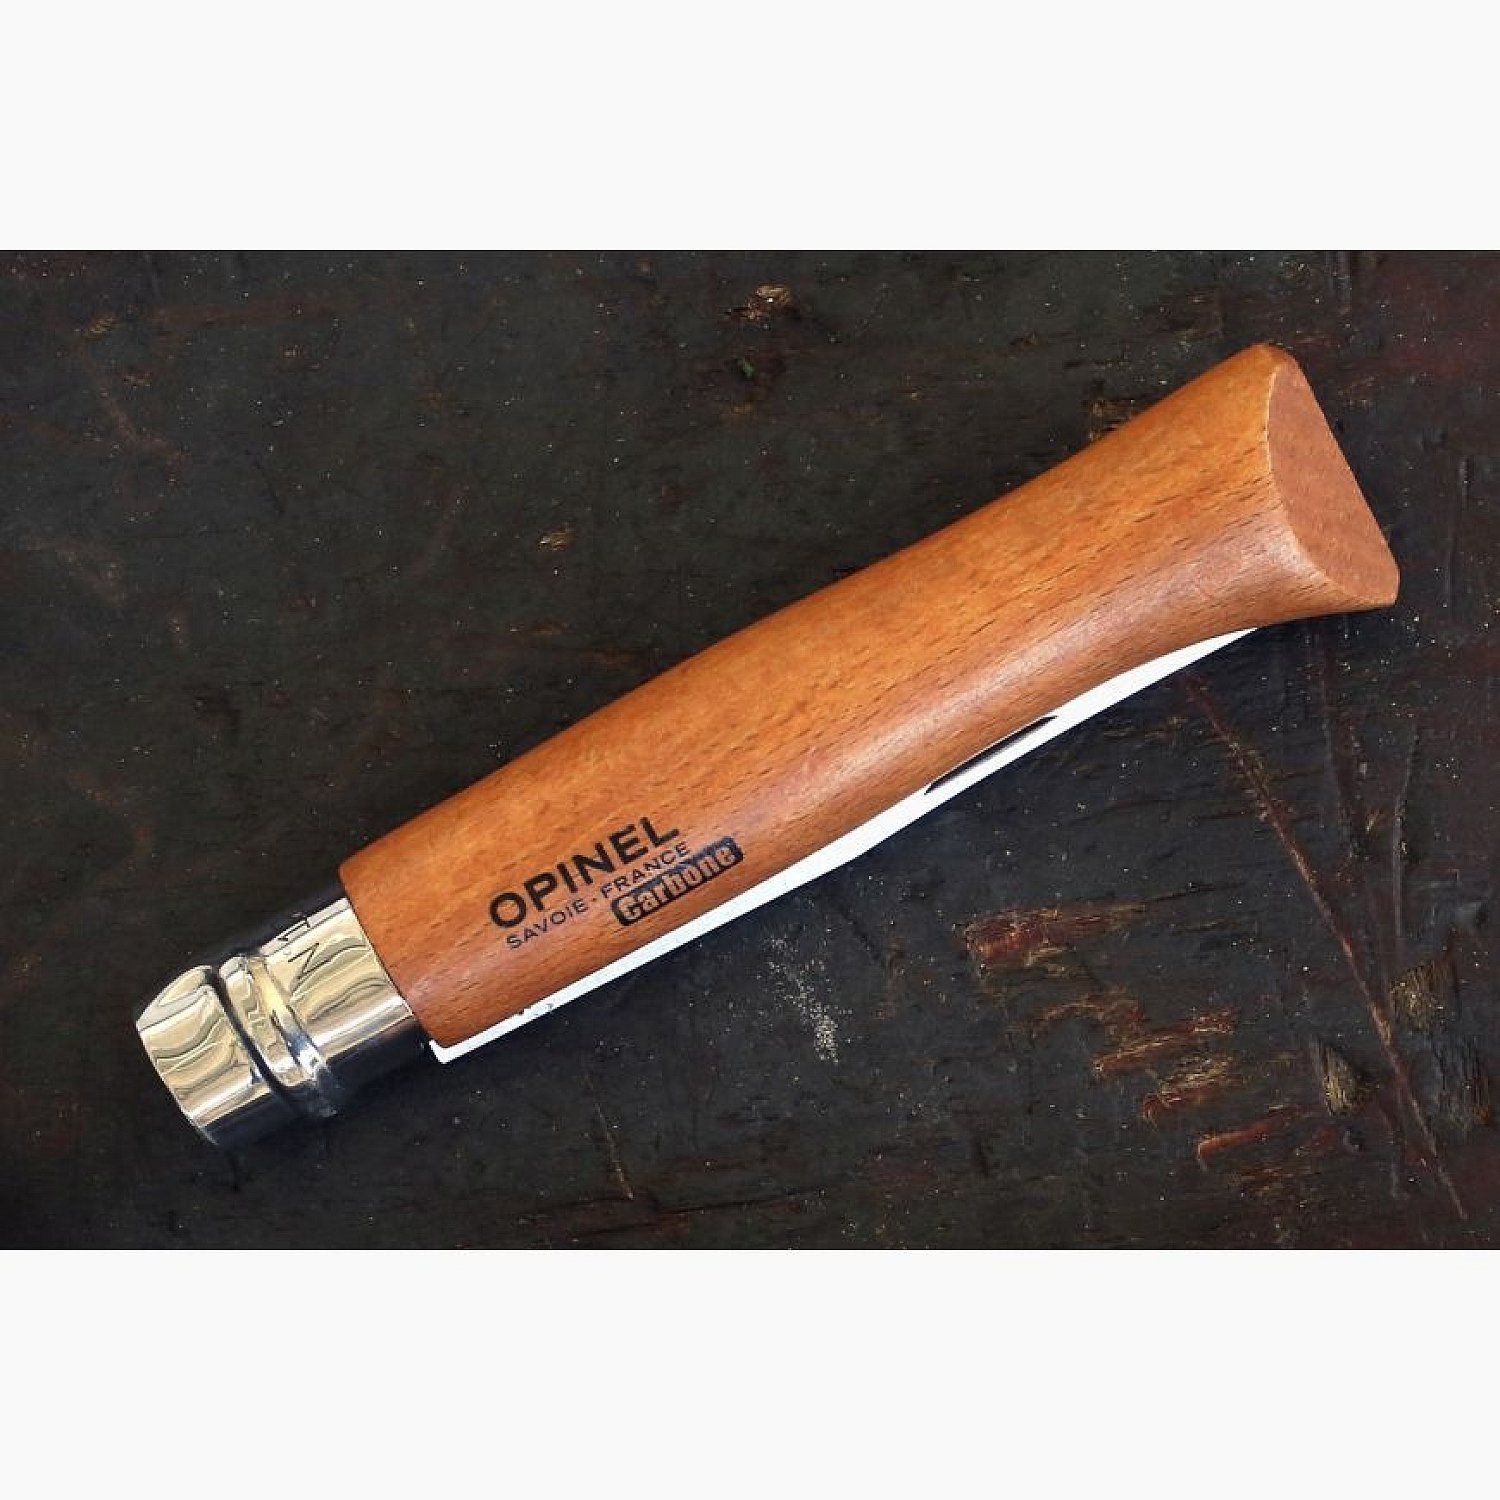  Opinel No. 12 Carbone - Carbon Steel Folding Pocket Knife,  Beechwood Handle, 4.82 in Blade, Virobloc Safety Locking Collar, Made in  France since 1890 : Sports & Outdoors